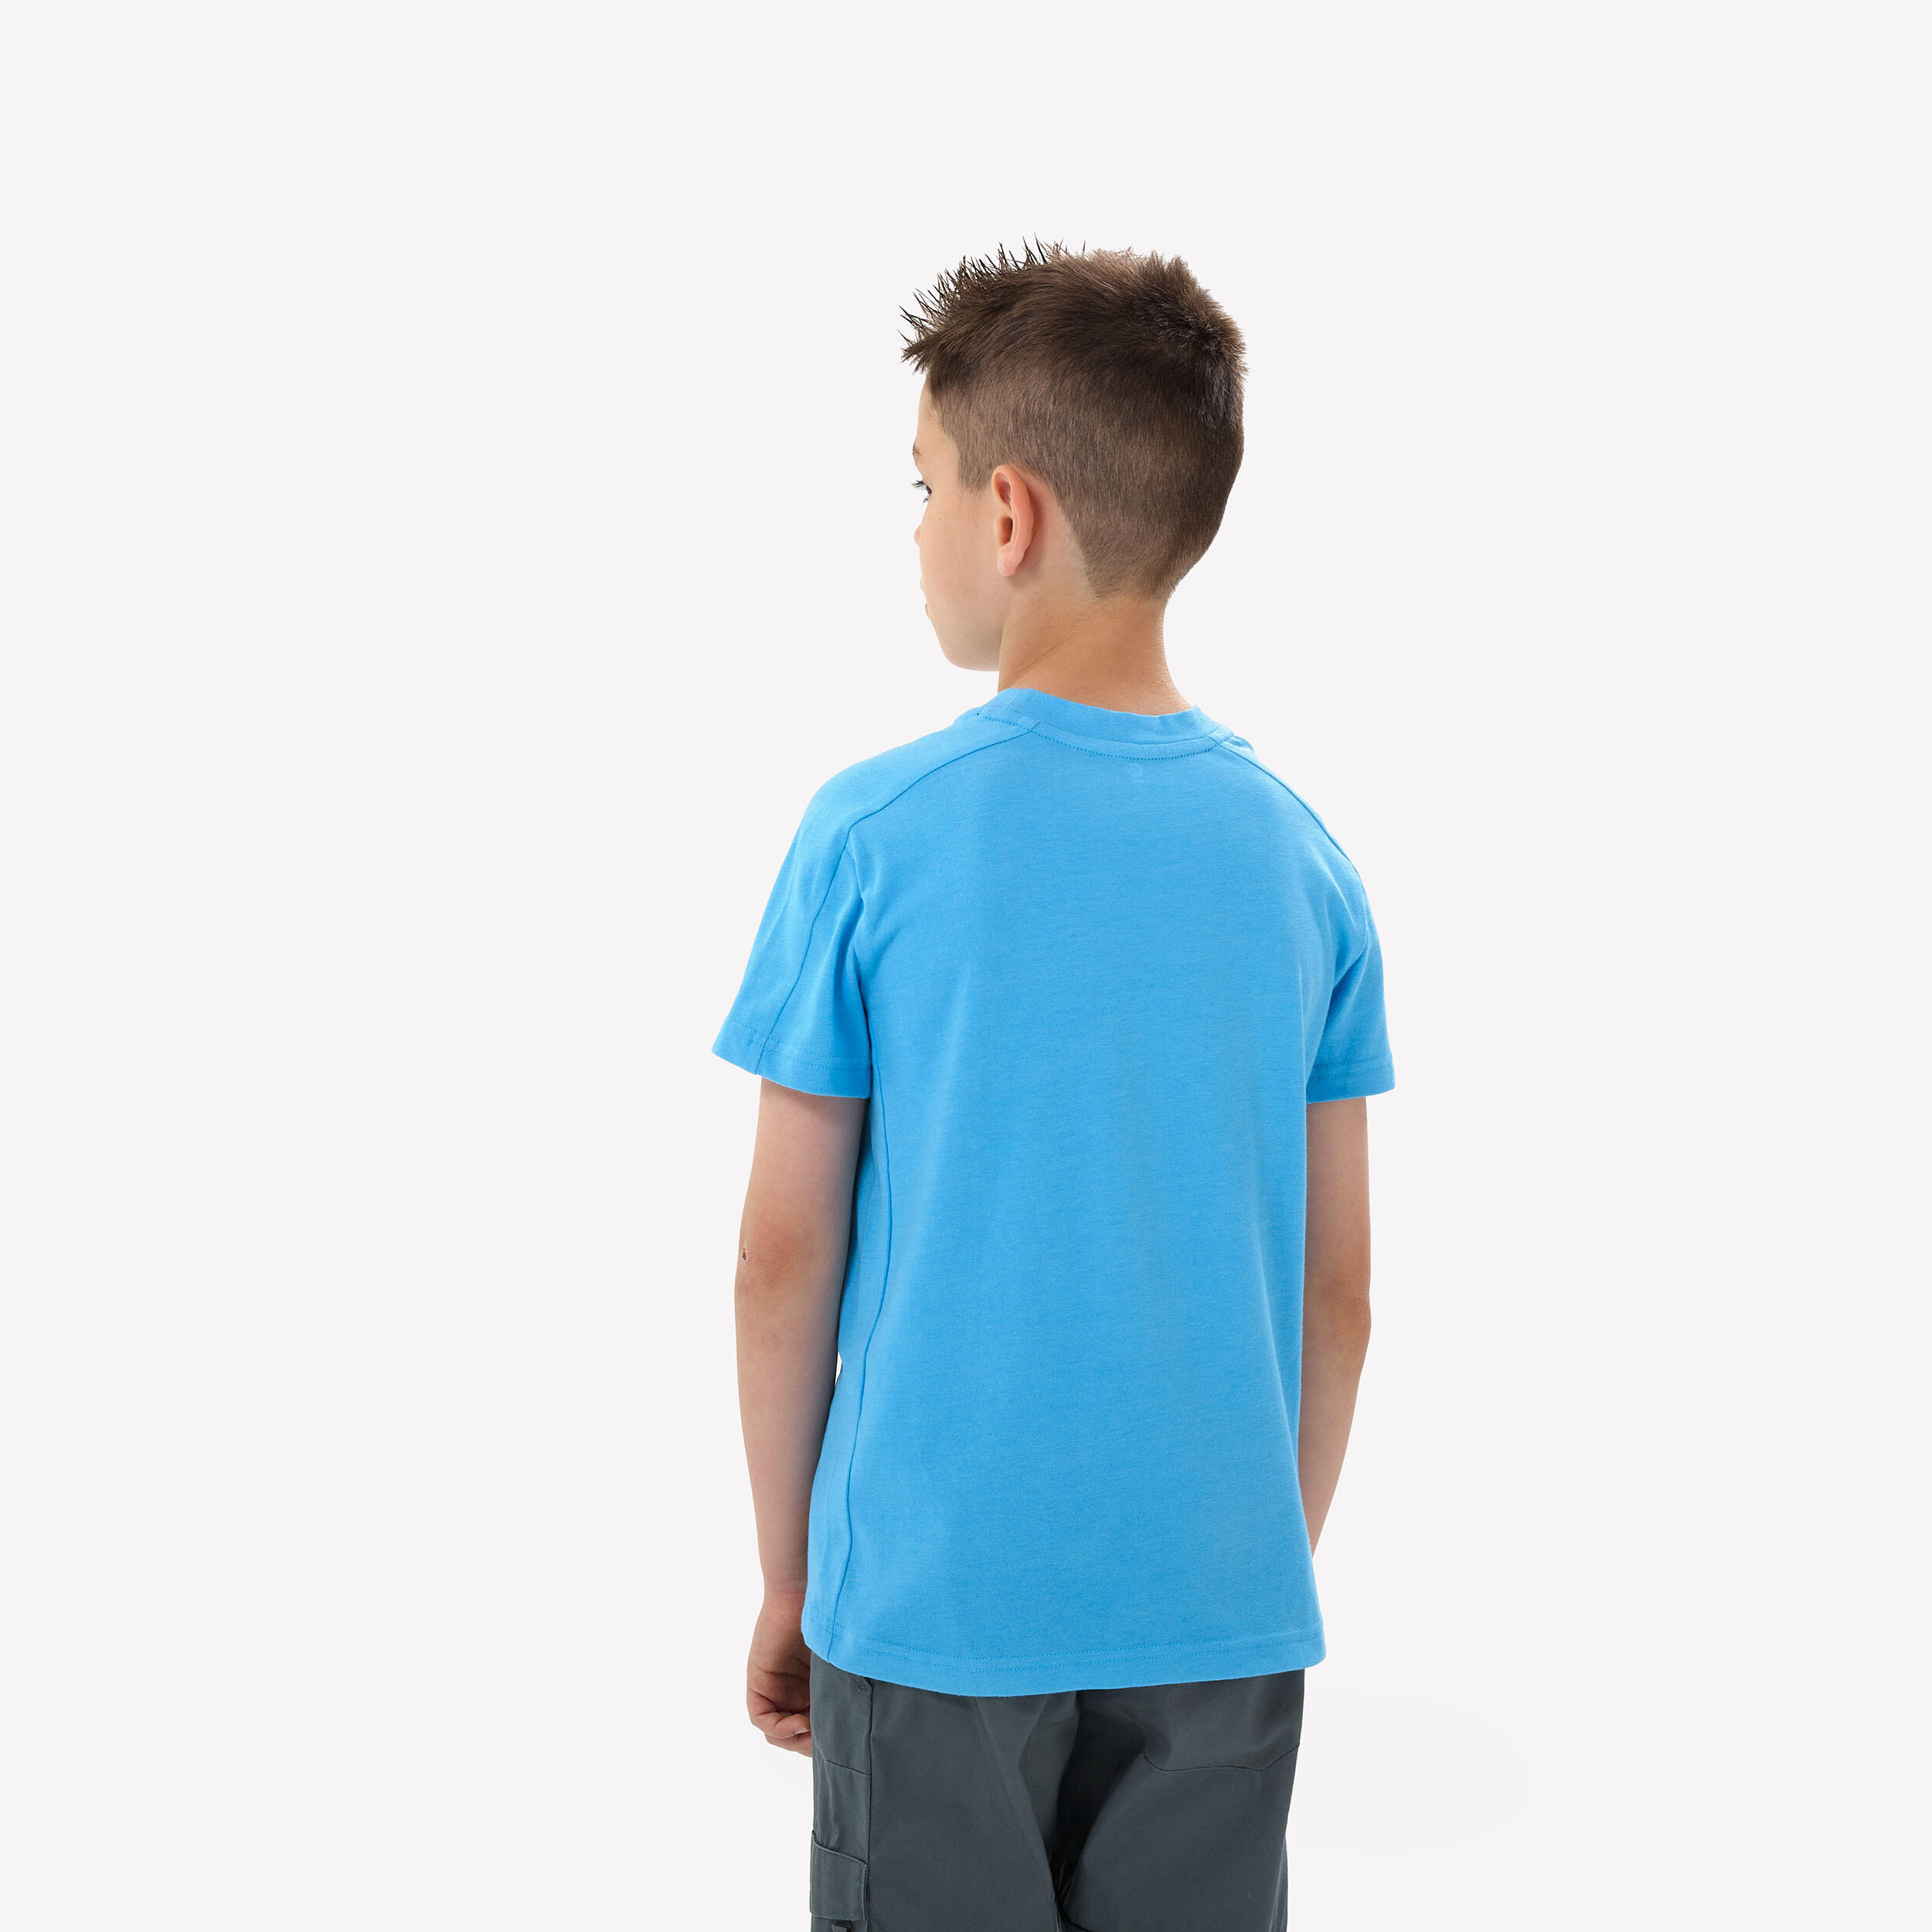 Kids’ Hiking T-Shirt - MH100 Ages 7-15 - Blue 4/6